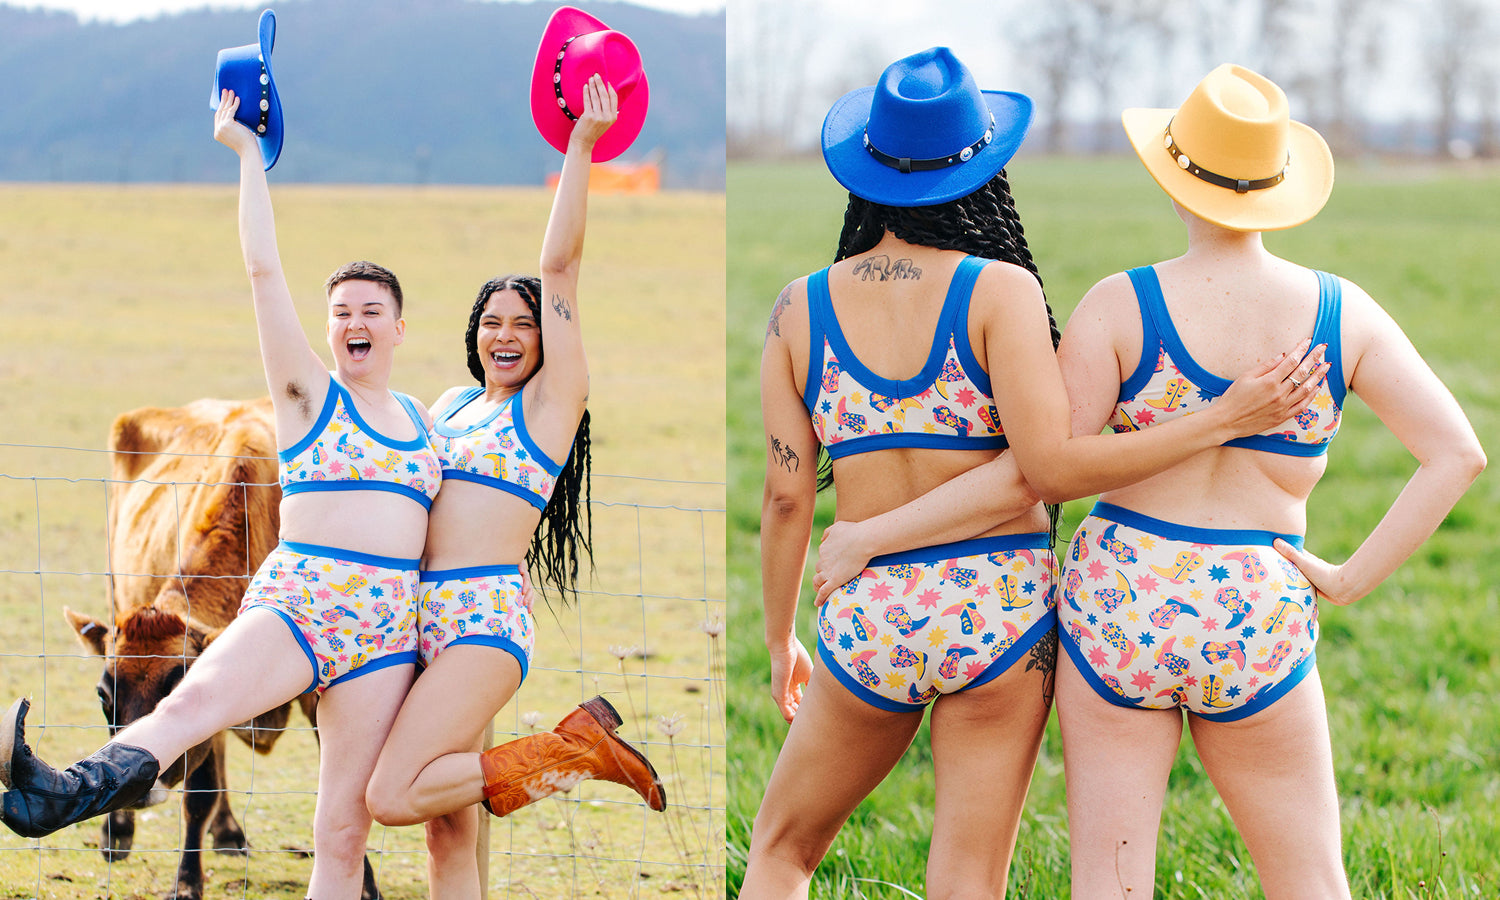 Models smiling in a field wearing Thunderpants underwear and Bralette sets in Boot Scootin' print.